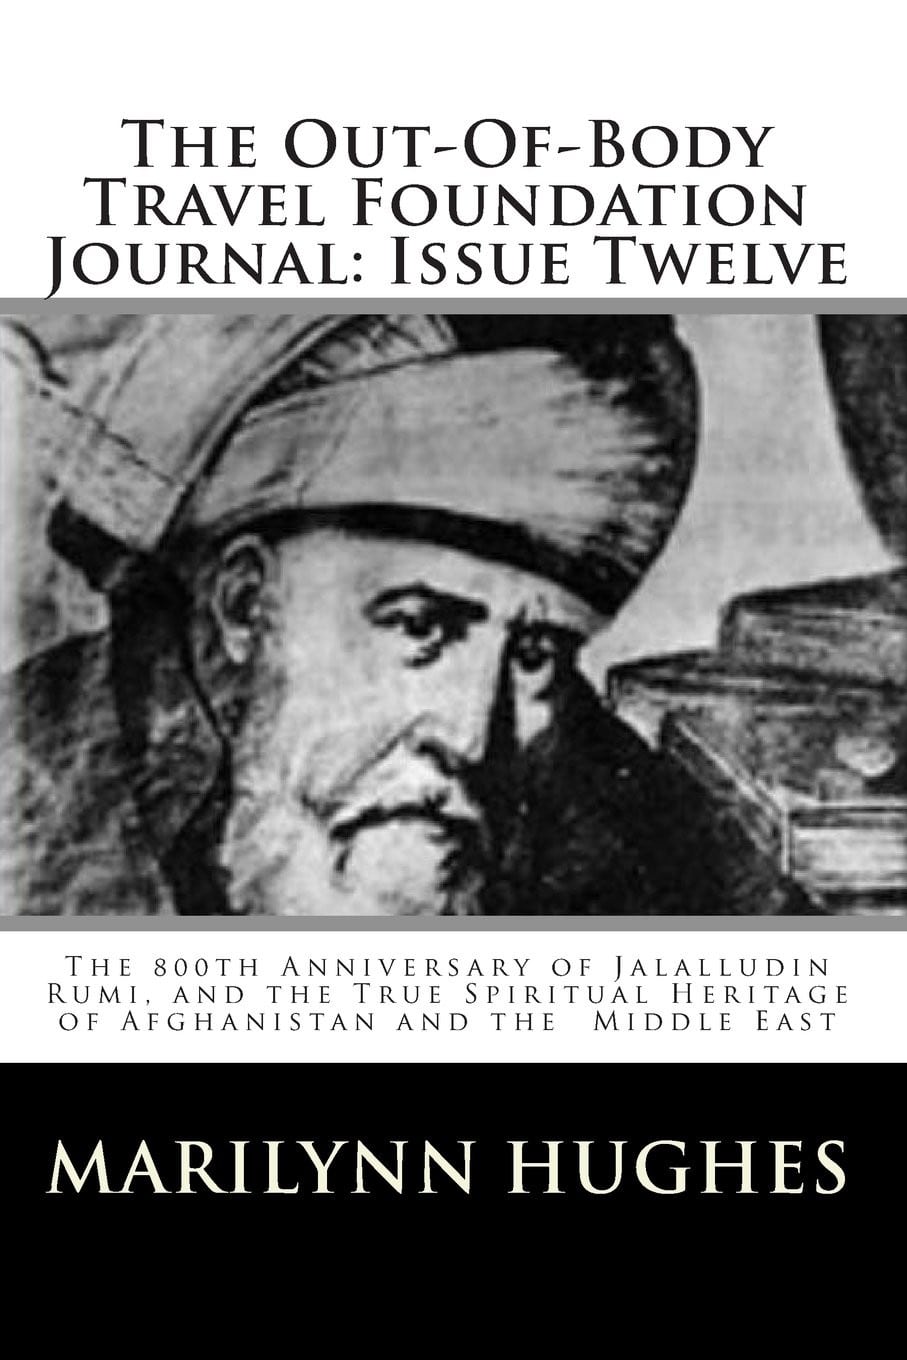 The 800th Anniversary of Jalalludin Rumi, and the True Spiritual Heritage of Afghanistan and the Middle East, By Marilynn Hughes